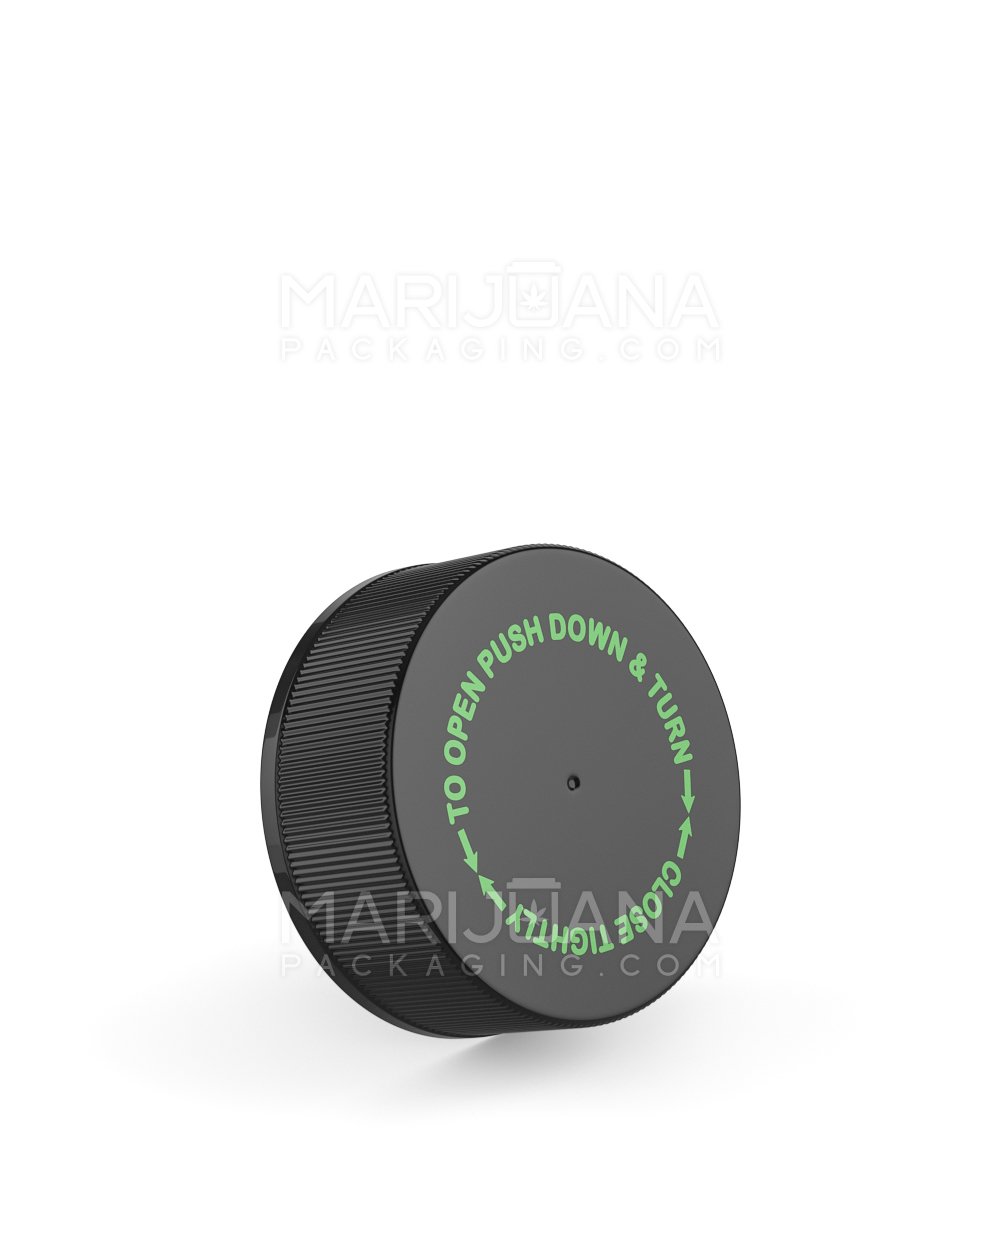 Child Resistant | Ribbed Push Down & Turn Plastic Caps w/ Text & Foam Liner | 38mm - Semi Gloss Black - 320 Count - 1